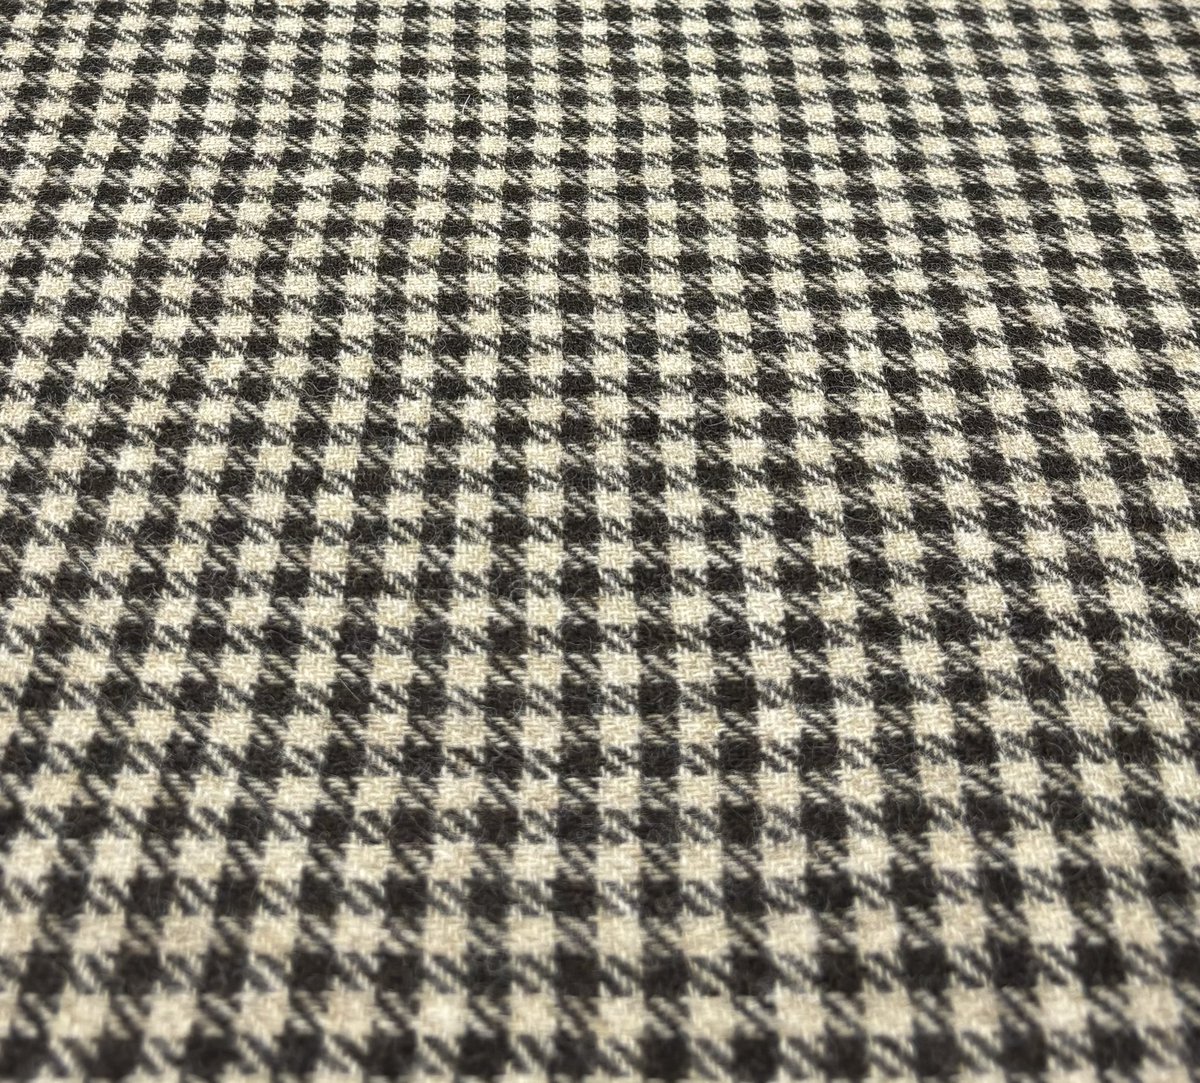 Gunclub check tweed fabric, beautiful soft brown and beige colours, ideal for jacketing, upholstery and more. Online at kabbanitextiles.com/tweed #madeinengland #tweed #fabric #wool #textiles #gunclub #checks #tailoring #hunting #upholstery #luxury